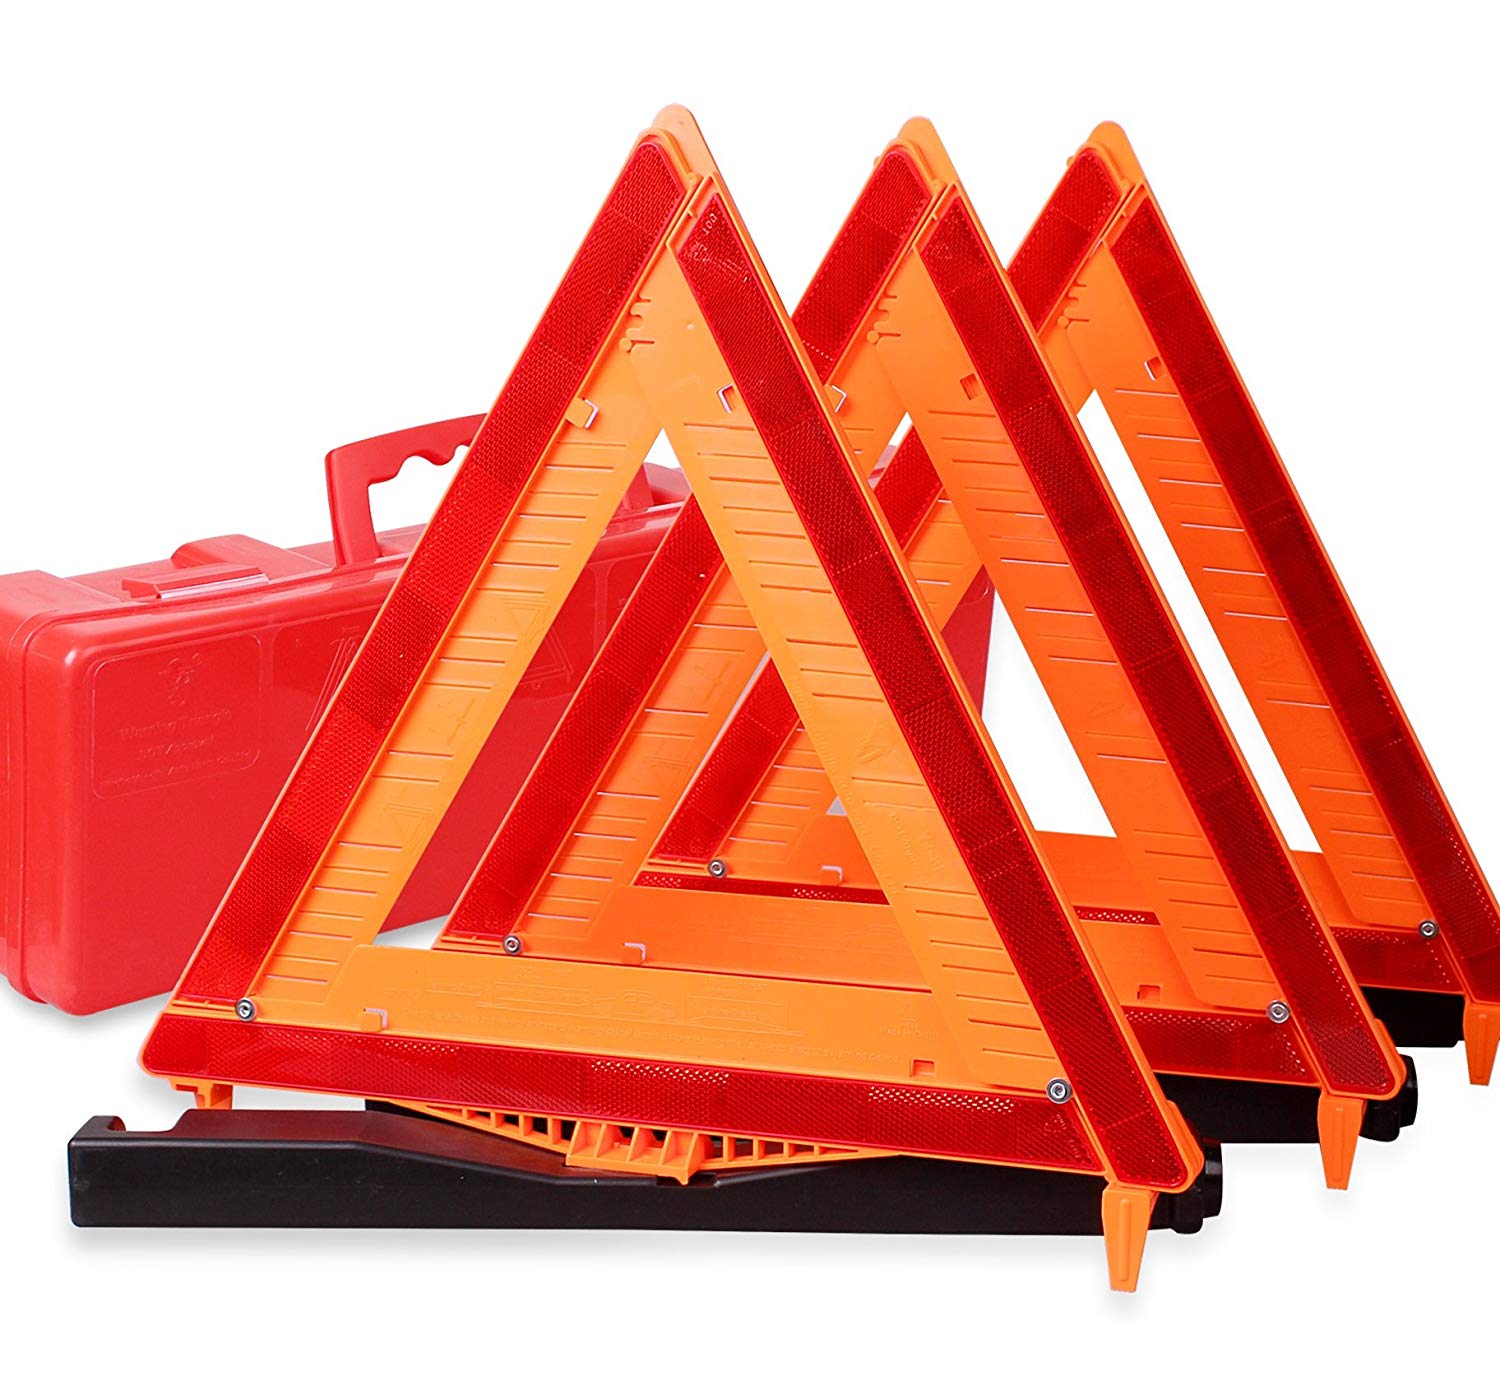 CARTMAN Warning Triangle DOT Approved 3PK, Identical to: United States FMVSS 571.125, Reflective Warning Road Safety Triangle Kit